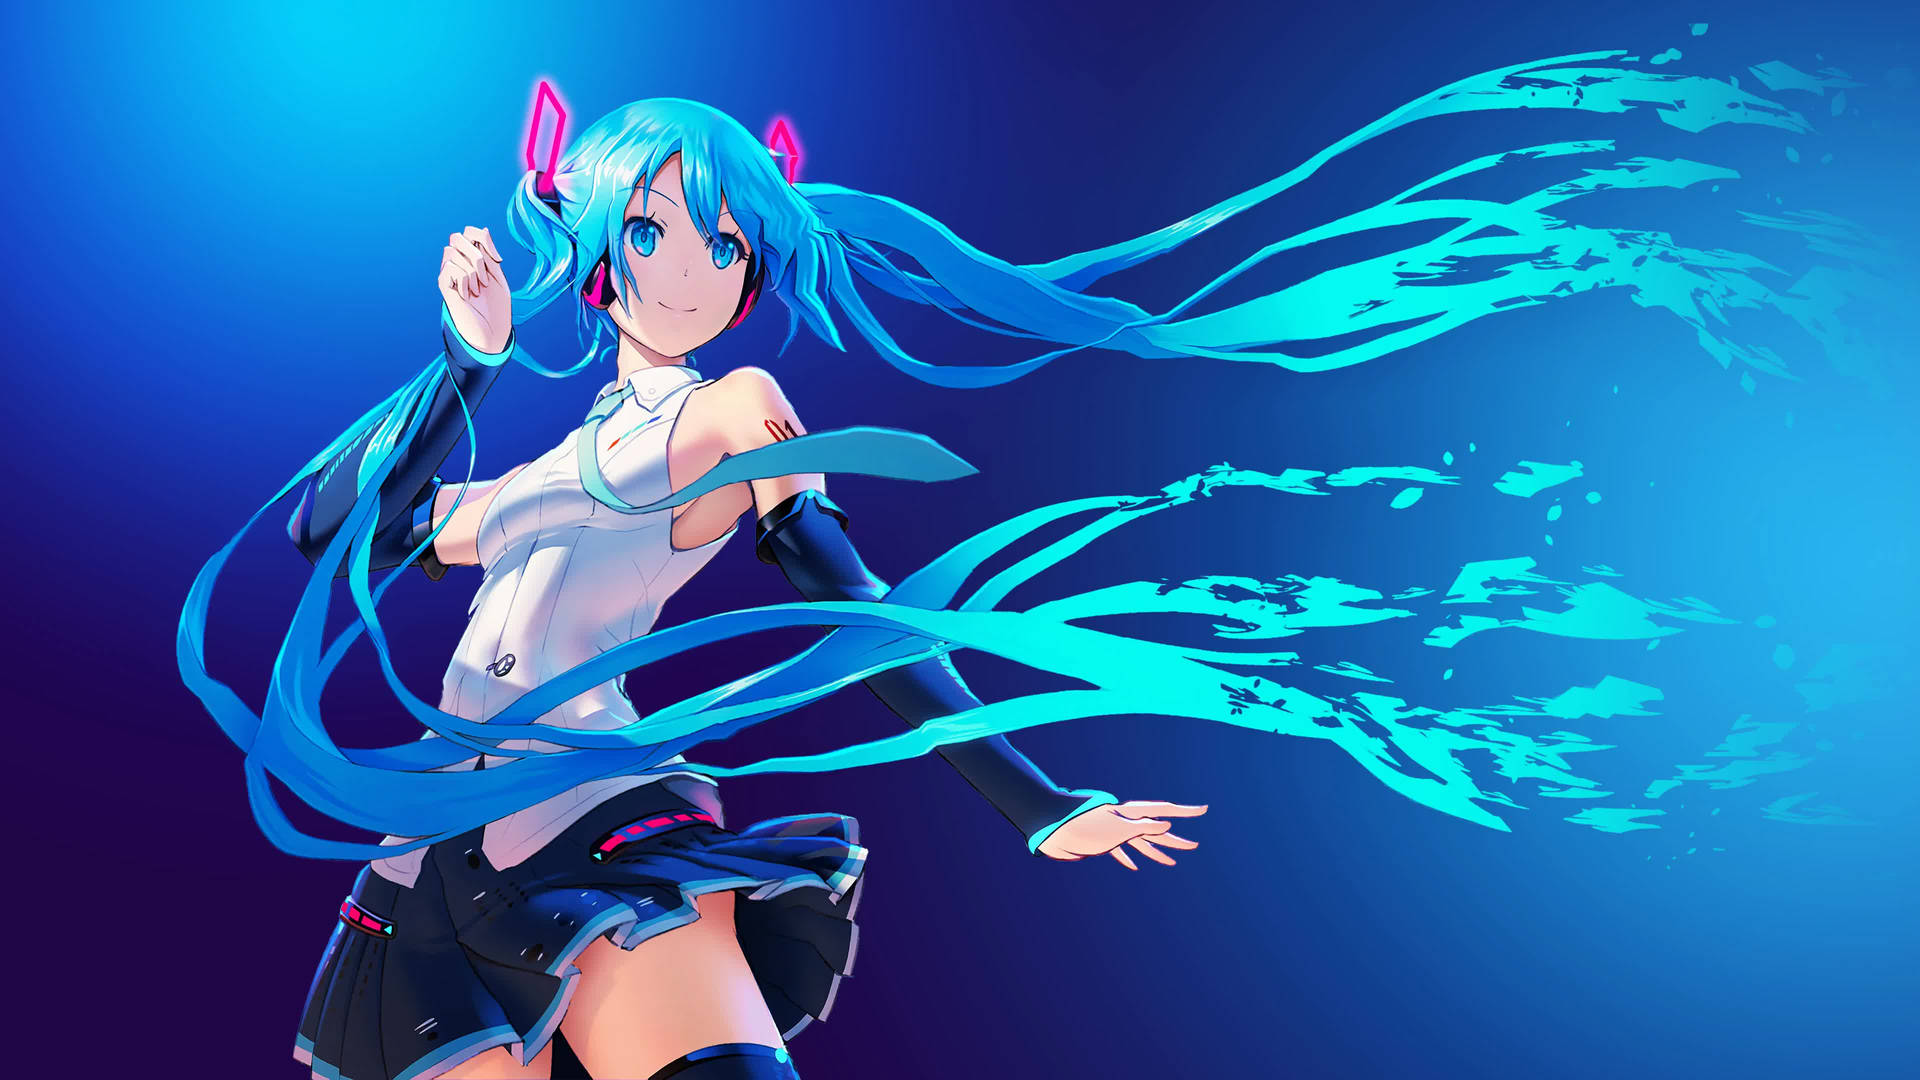 Anime Live Wallpapers - MyLiveWallpapers.com